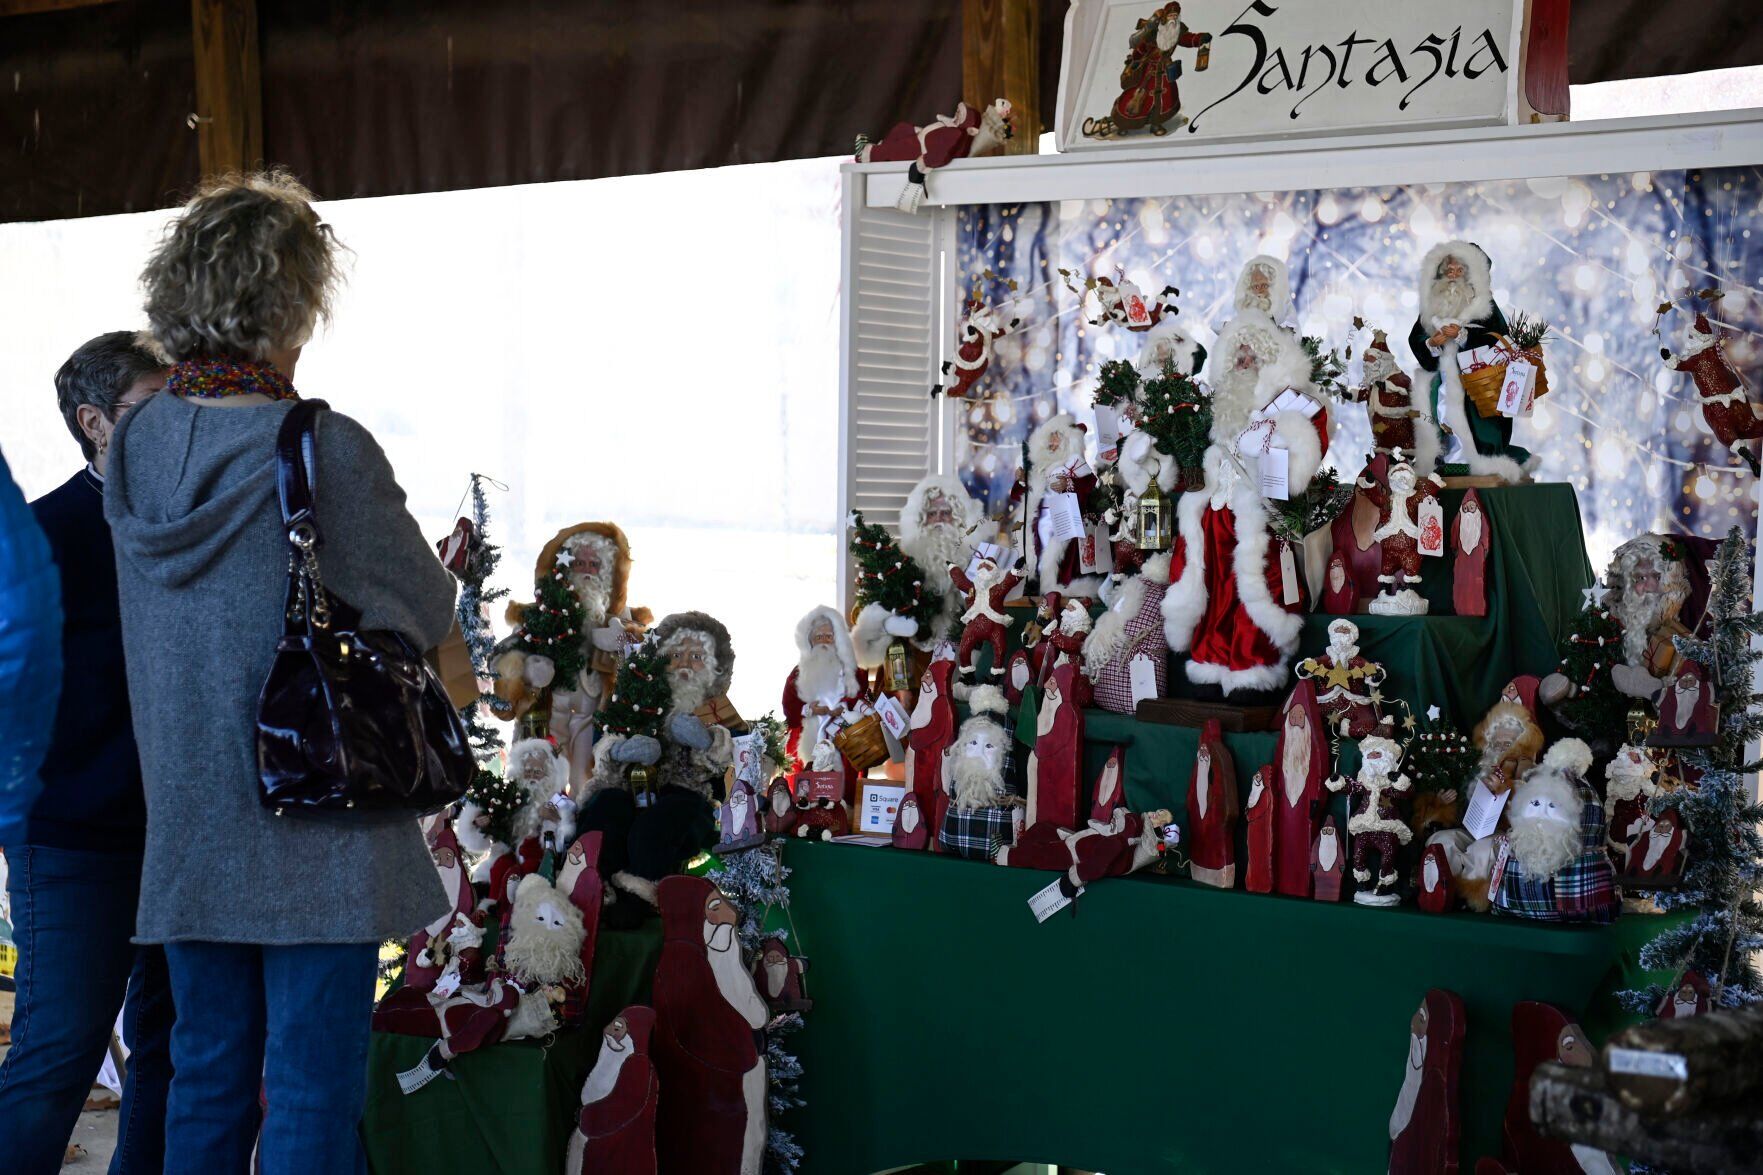 Bedford County Farmers Market rings in the holidays with festive market